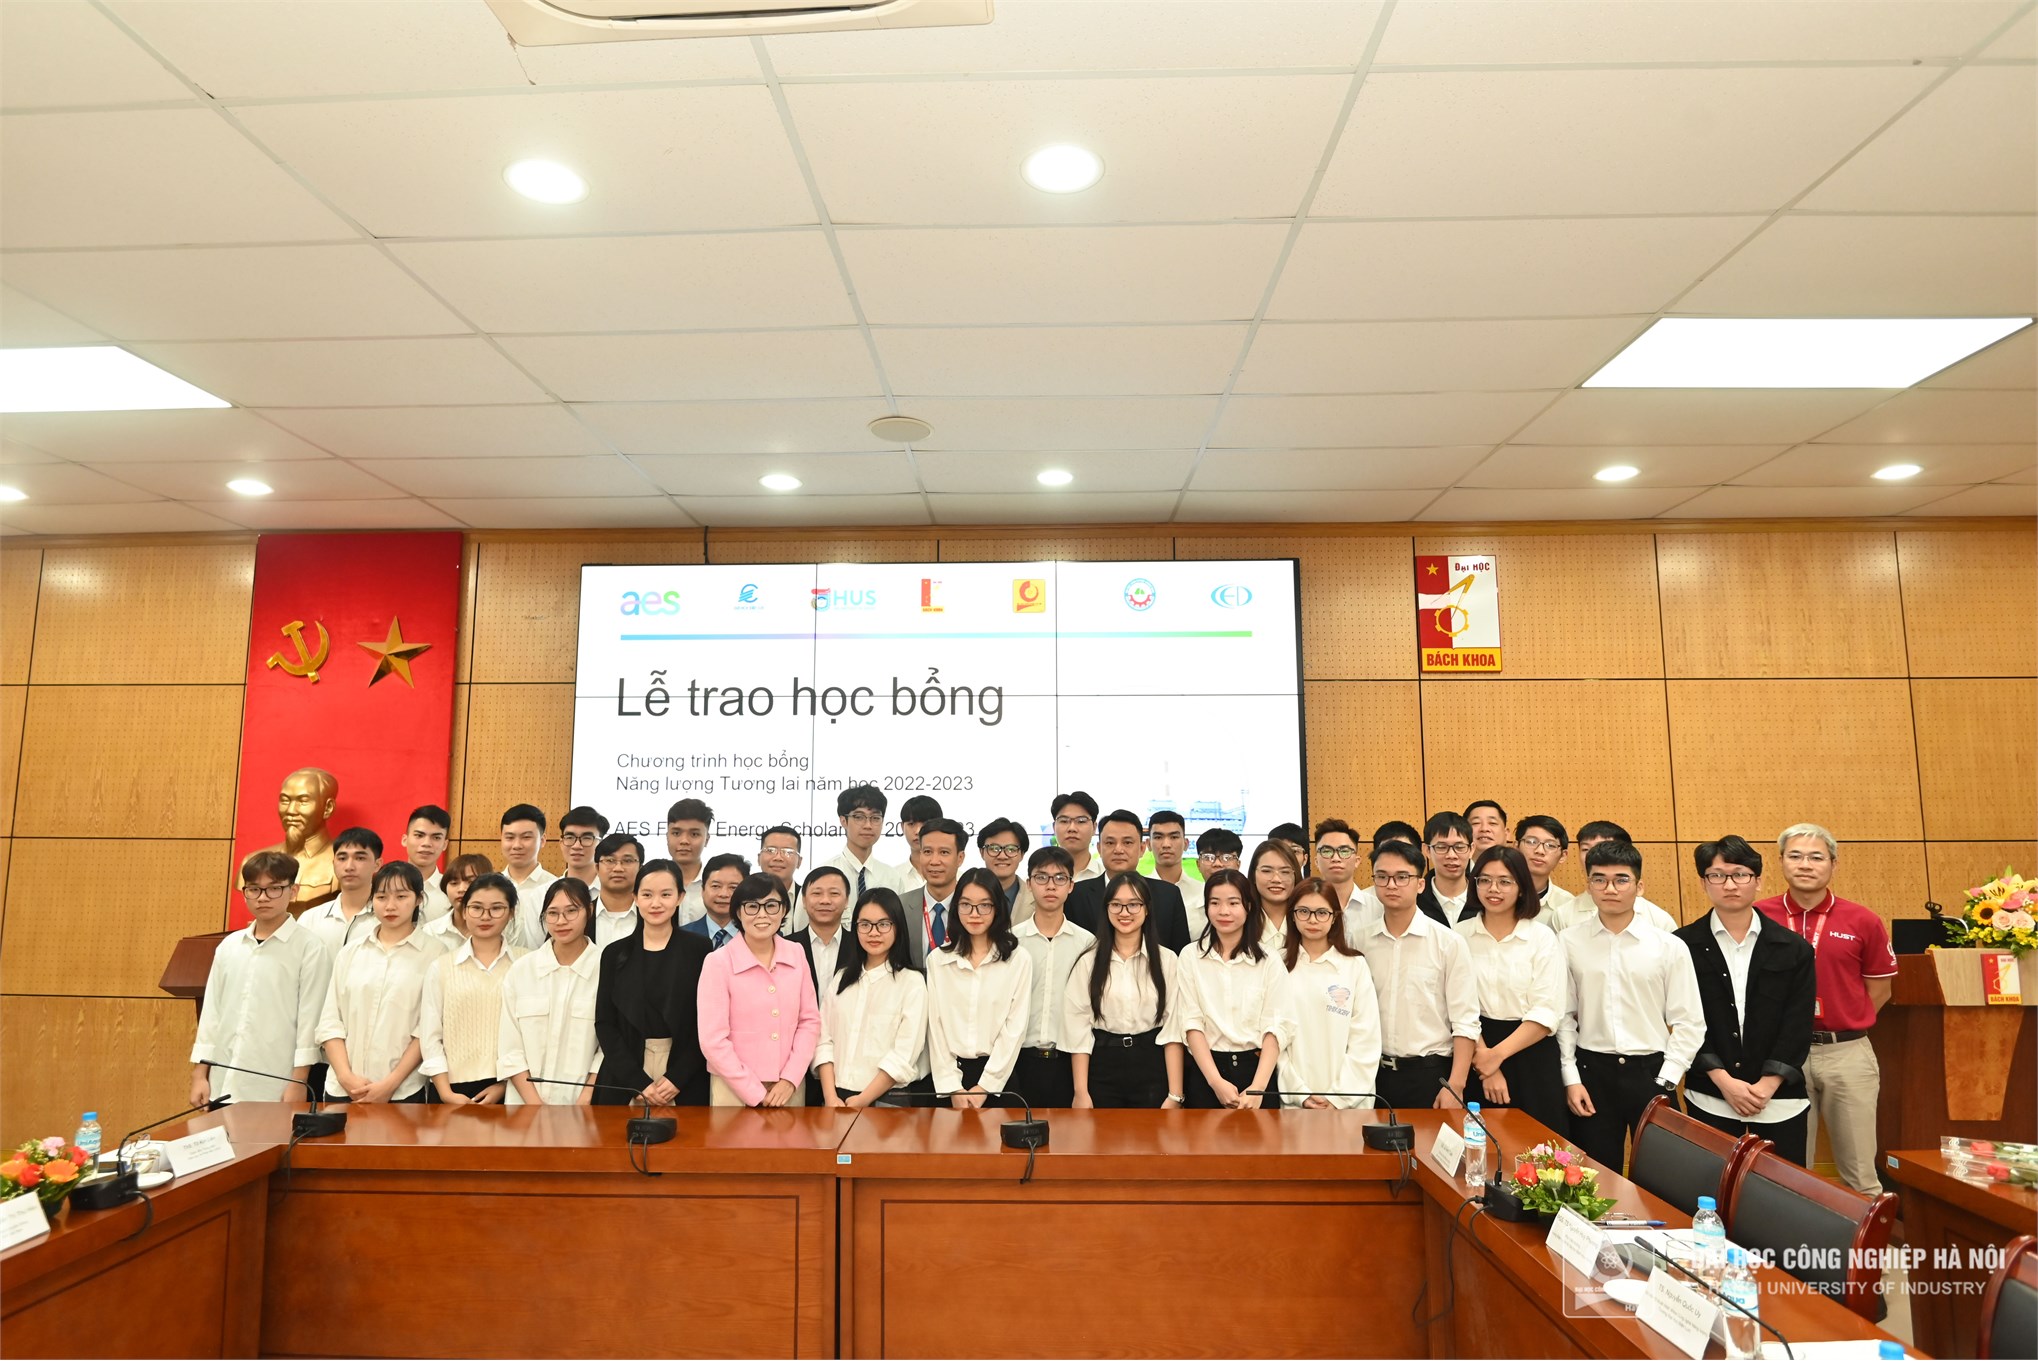 Students of Hanoi University of Industry received the AES Future Energy Scholarship